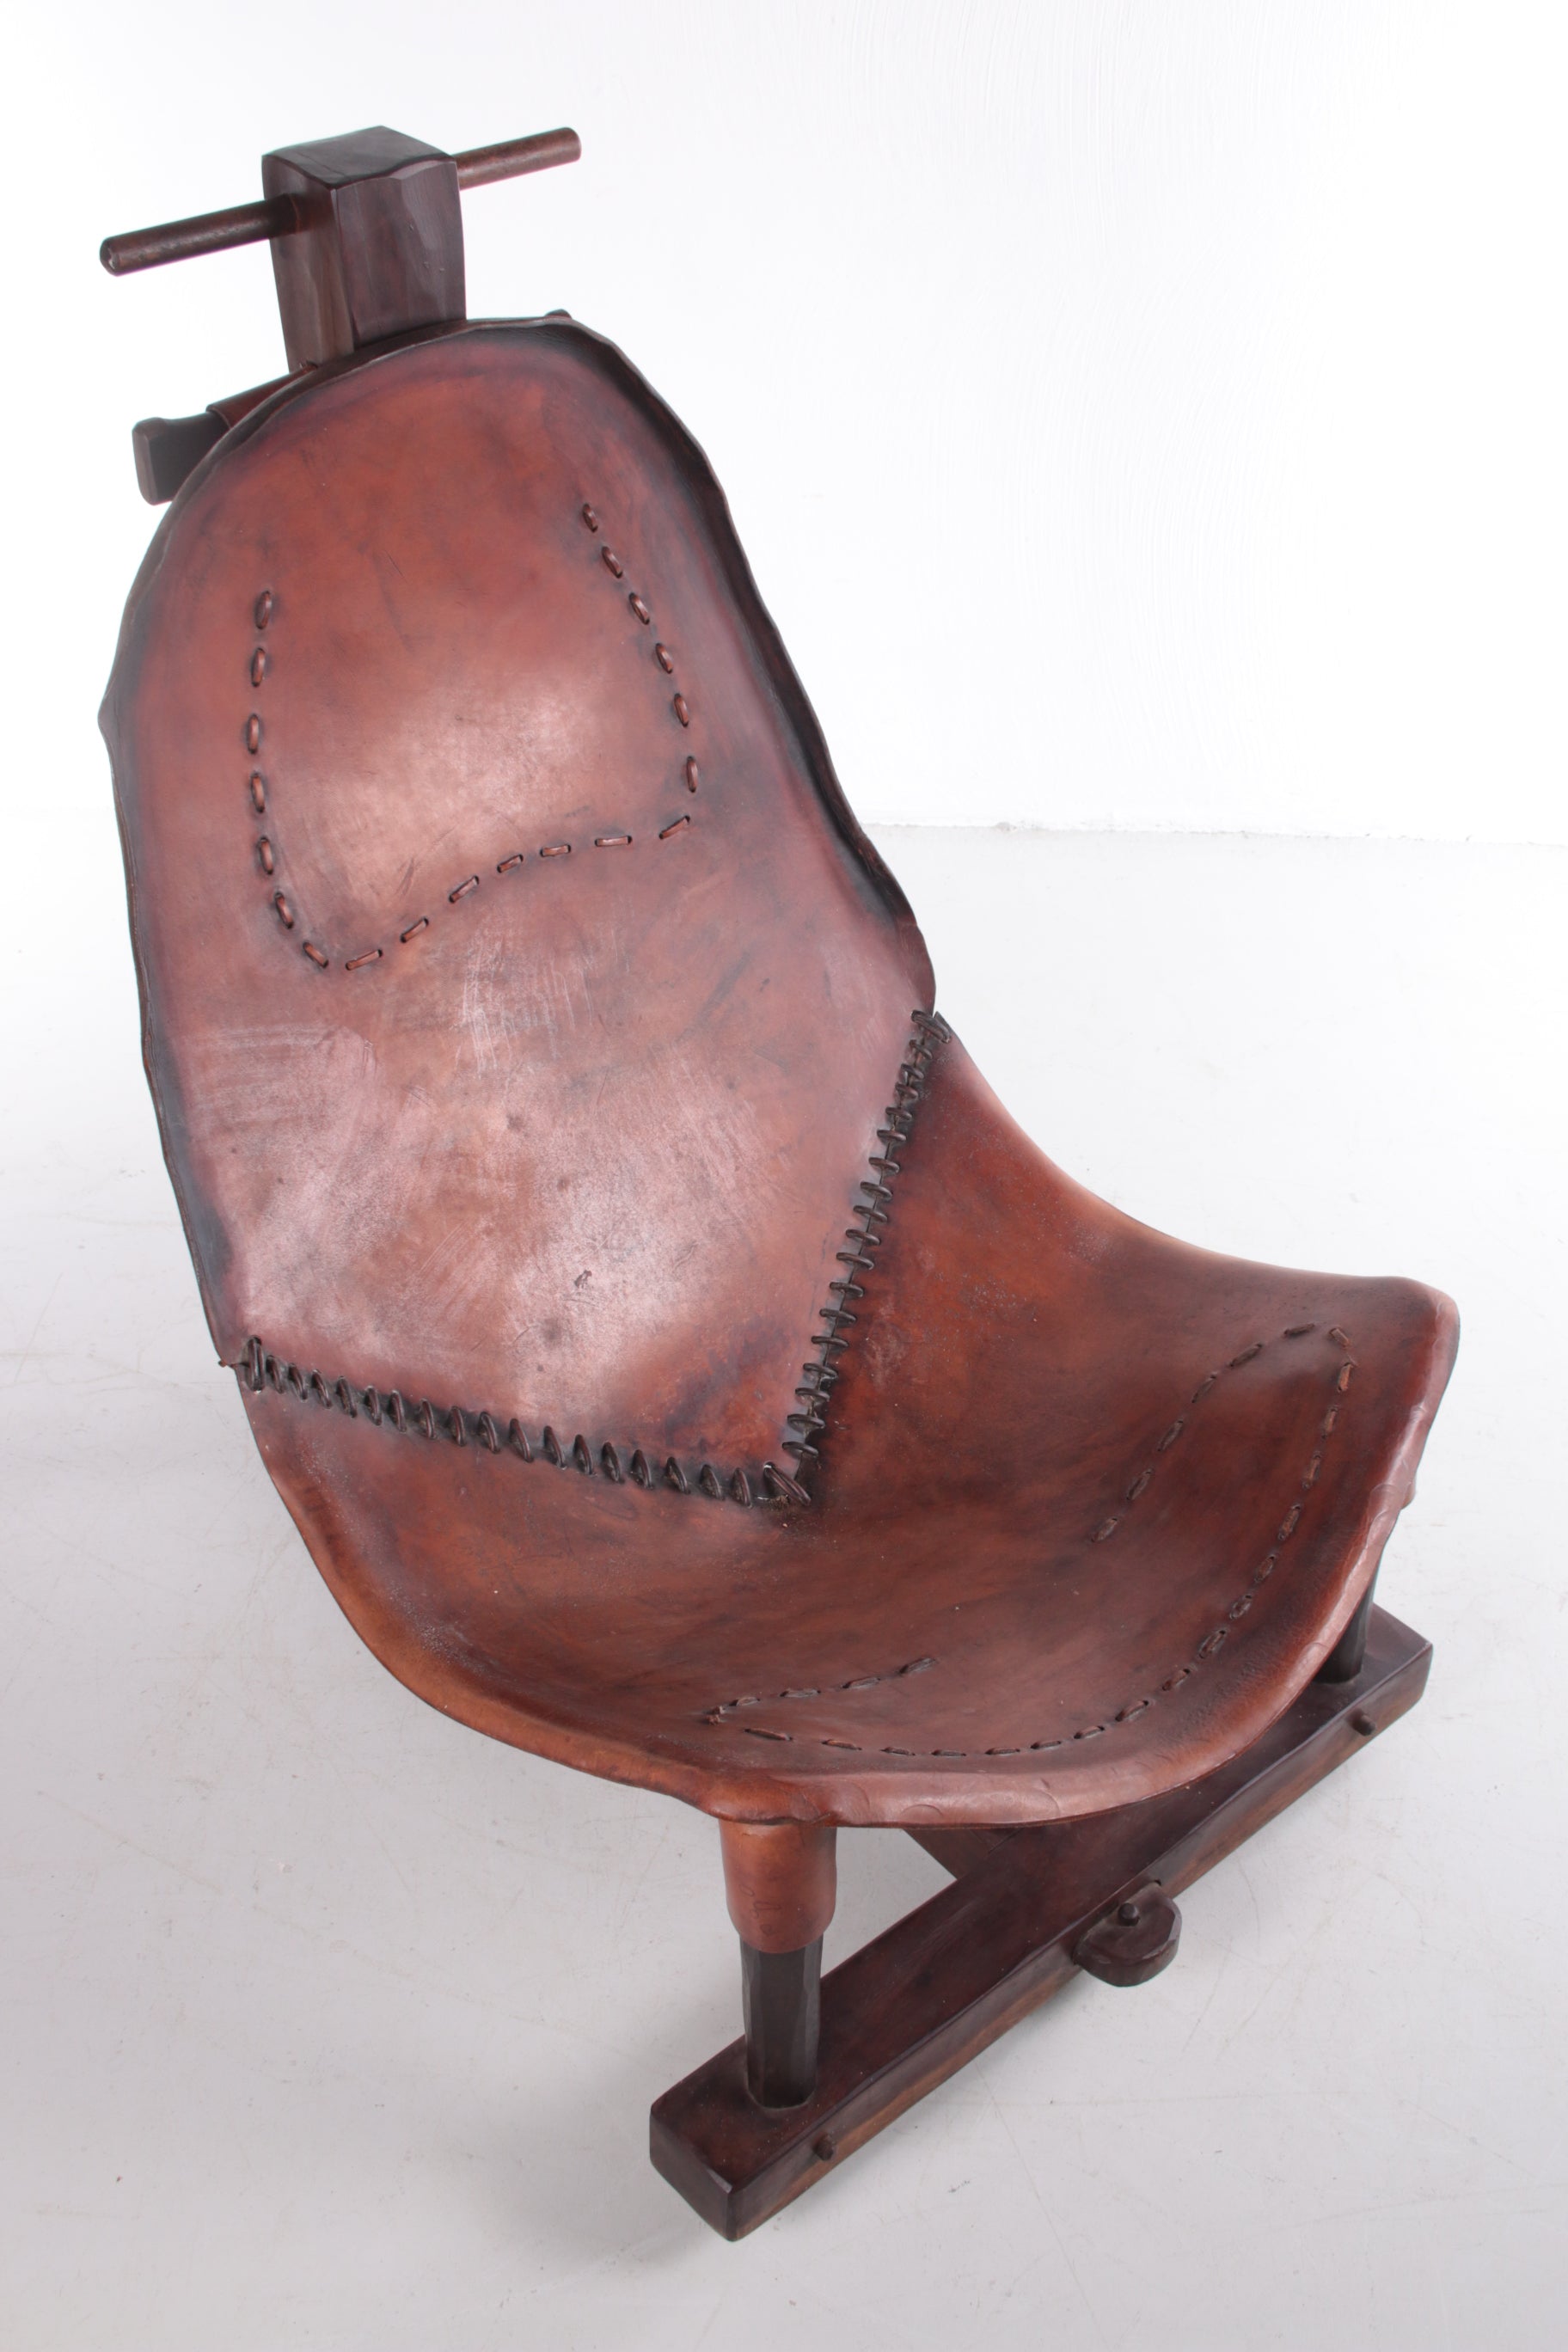 Brazilian Patched Leather Lounge Chair,1960s bovenkant zonder kussens